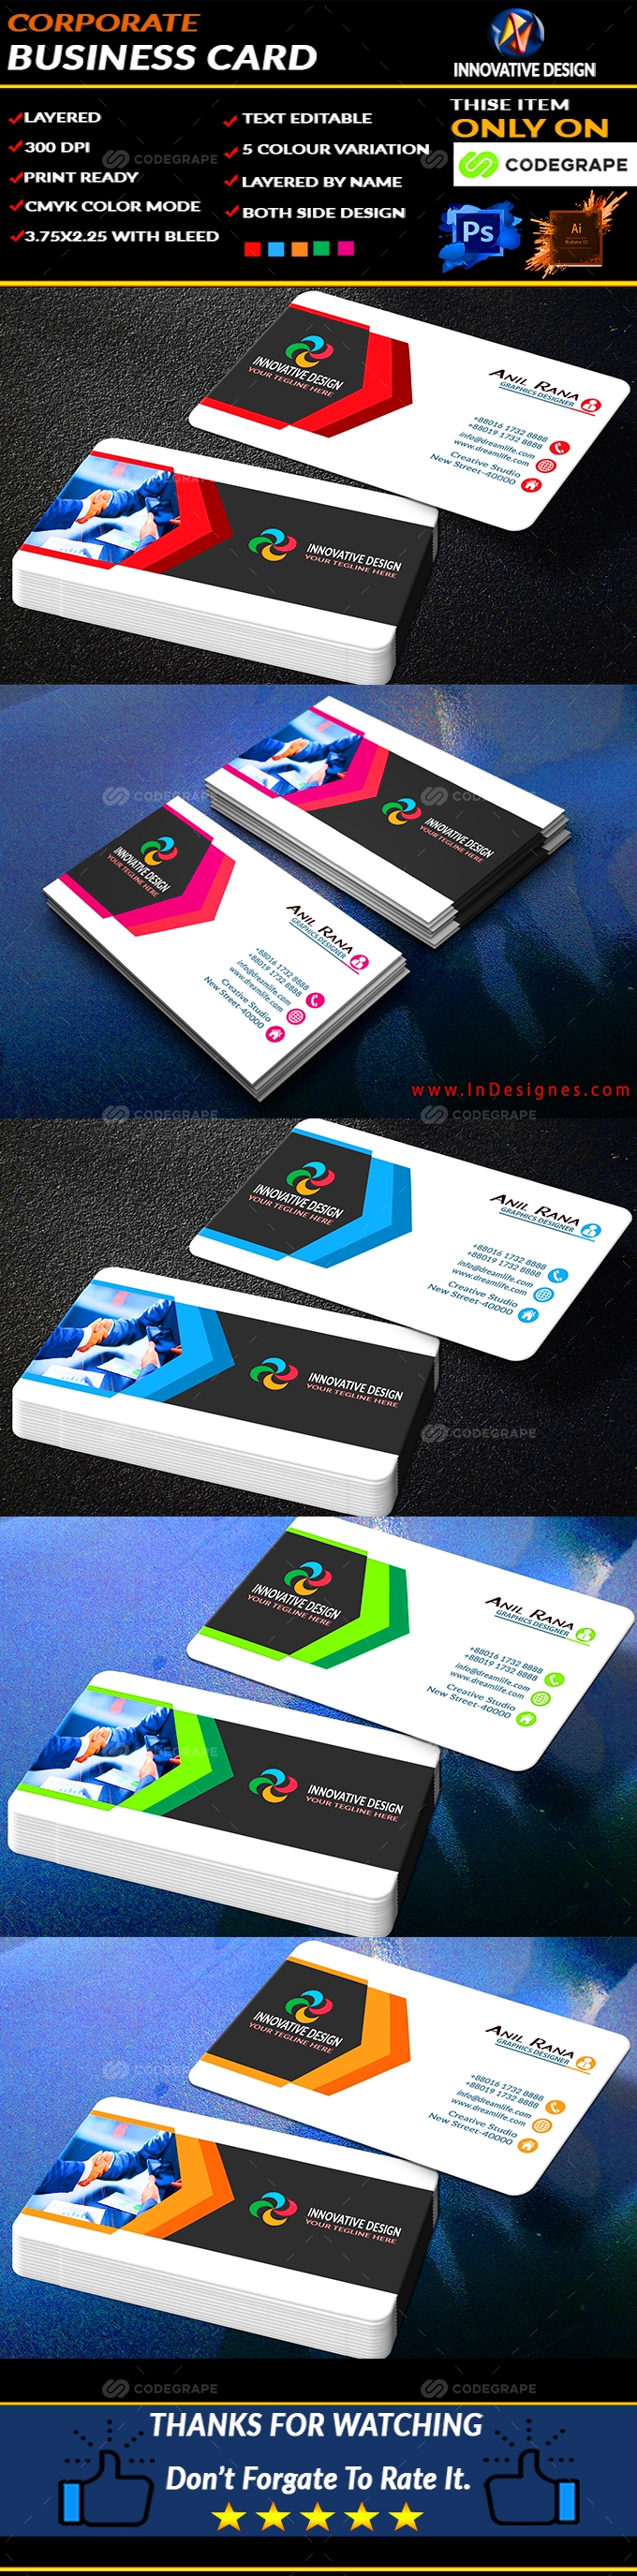 Corporrate Business Card 5 in 1